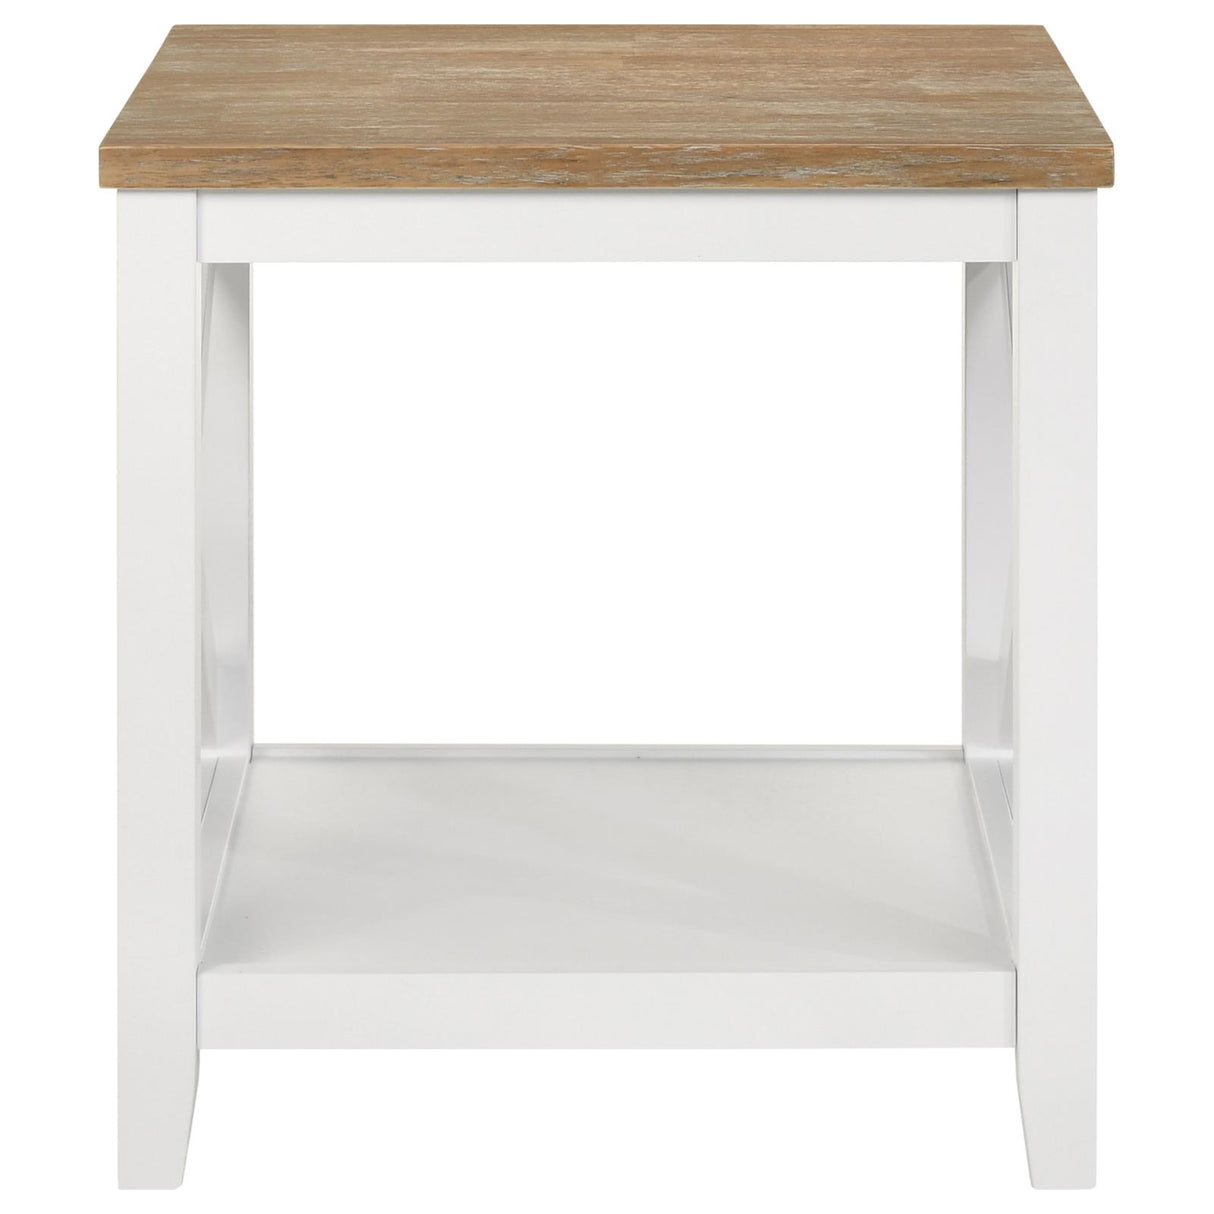 Maisy Square Wooden End Table With Shelf Brown and White - 708097 - Luna Furniture